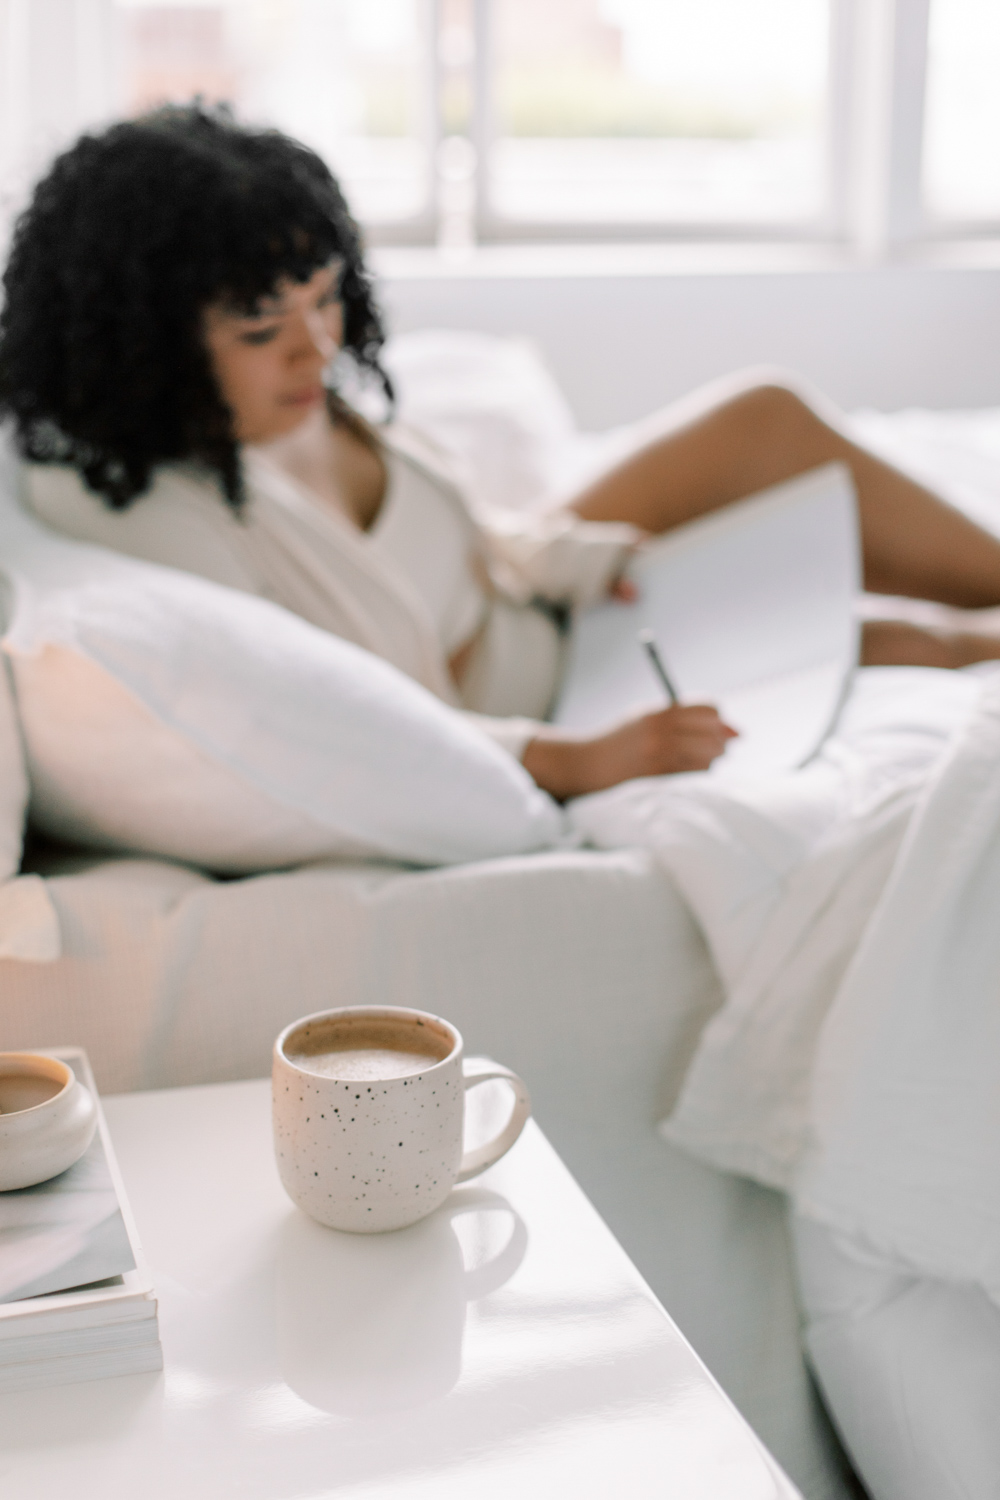 create a healthy morning routine that brings you joy